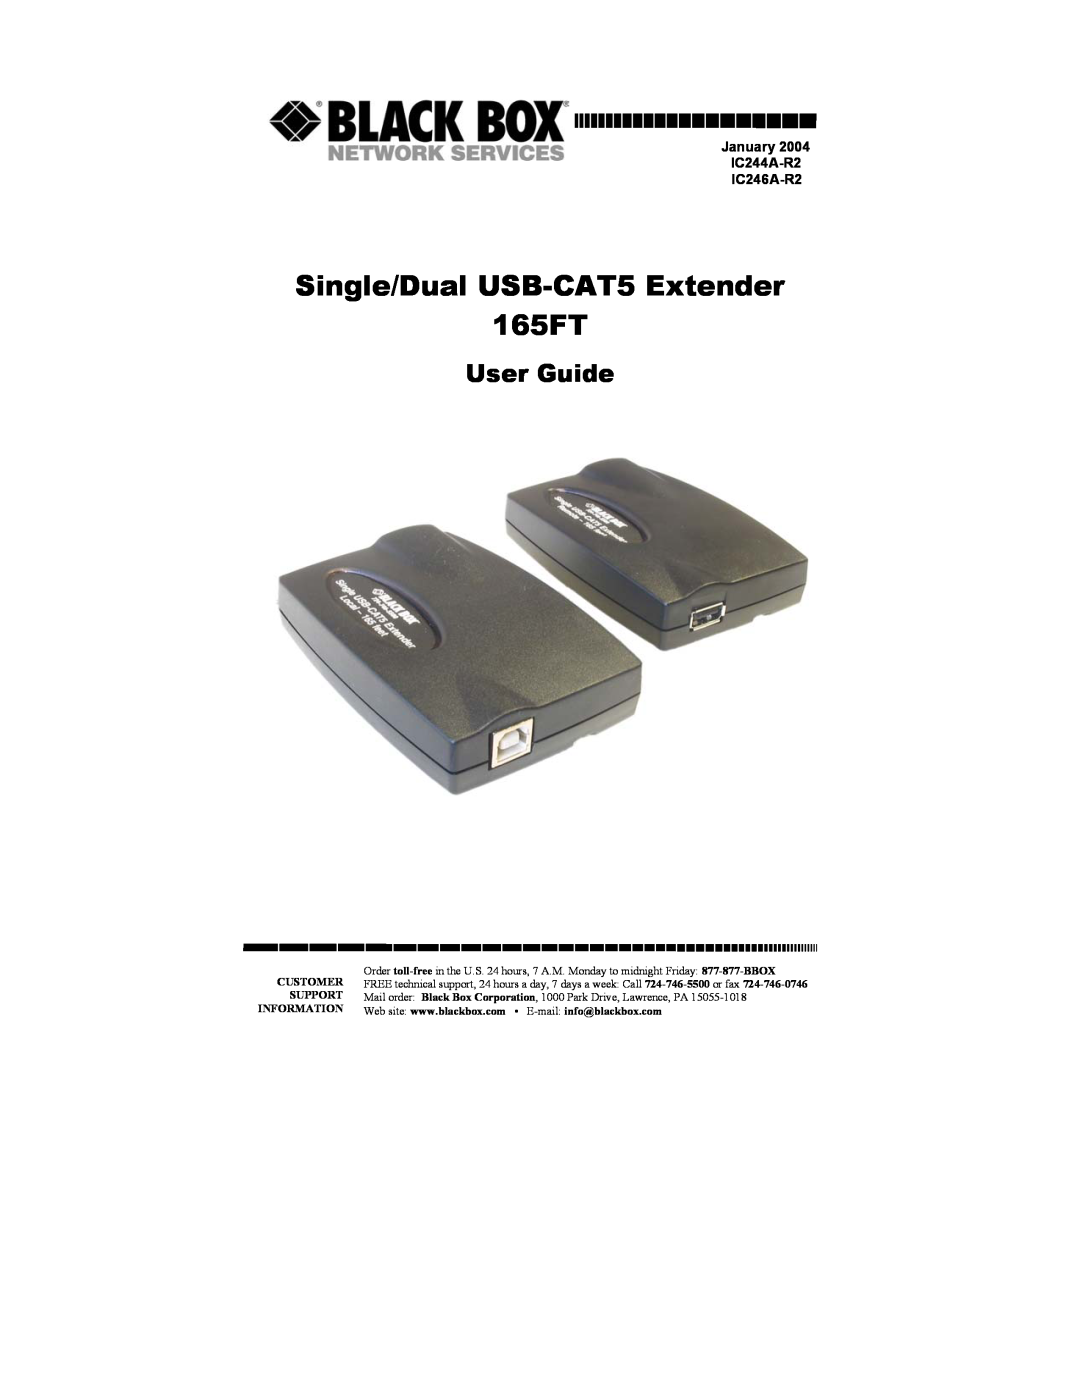 Black Box manual User Guide, Single/Dual USB-CAT5Extender 165FT, January IC244A-R2 IC246A-R2, Customer, Support 